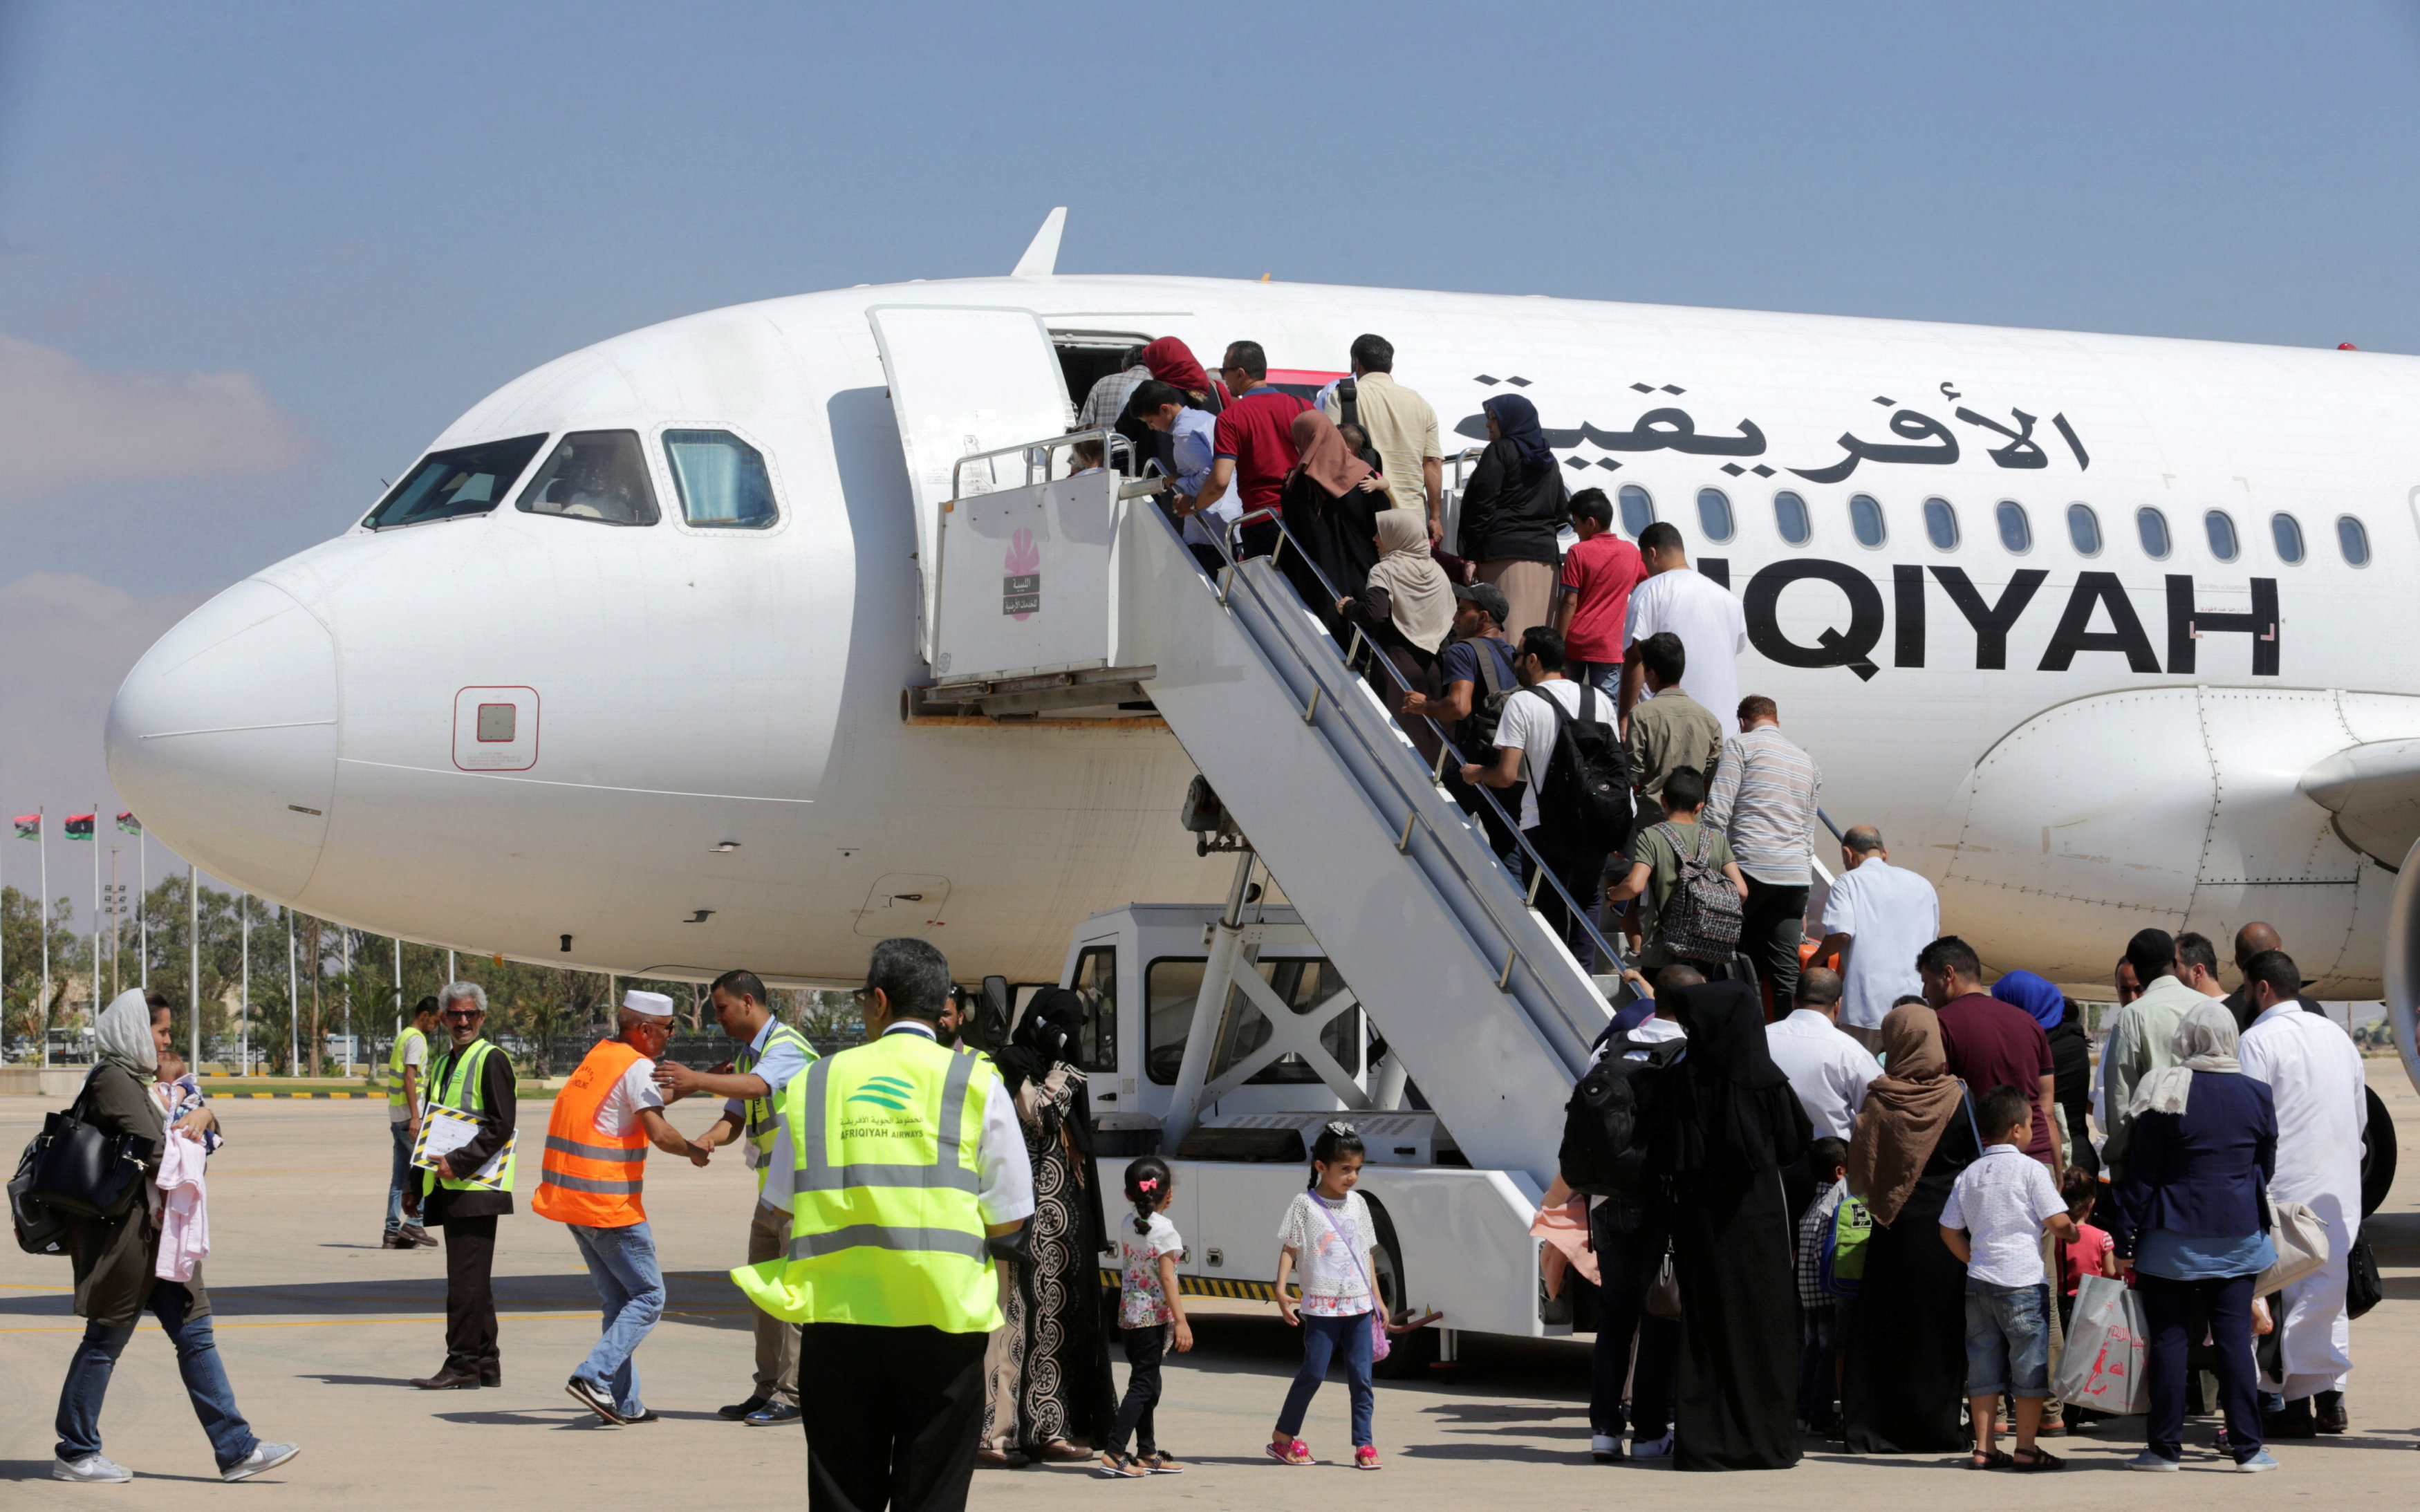 Benghazi airport reopens after three-year closure during war